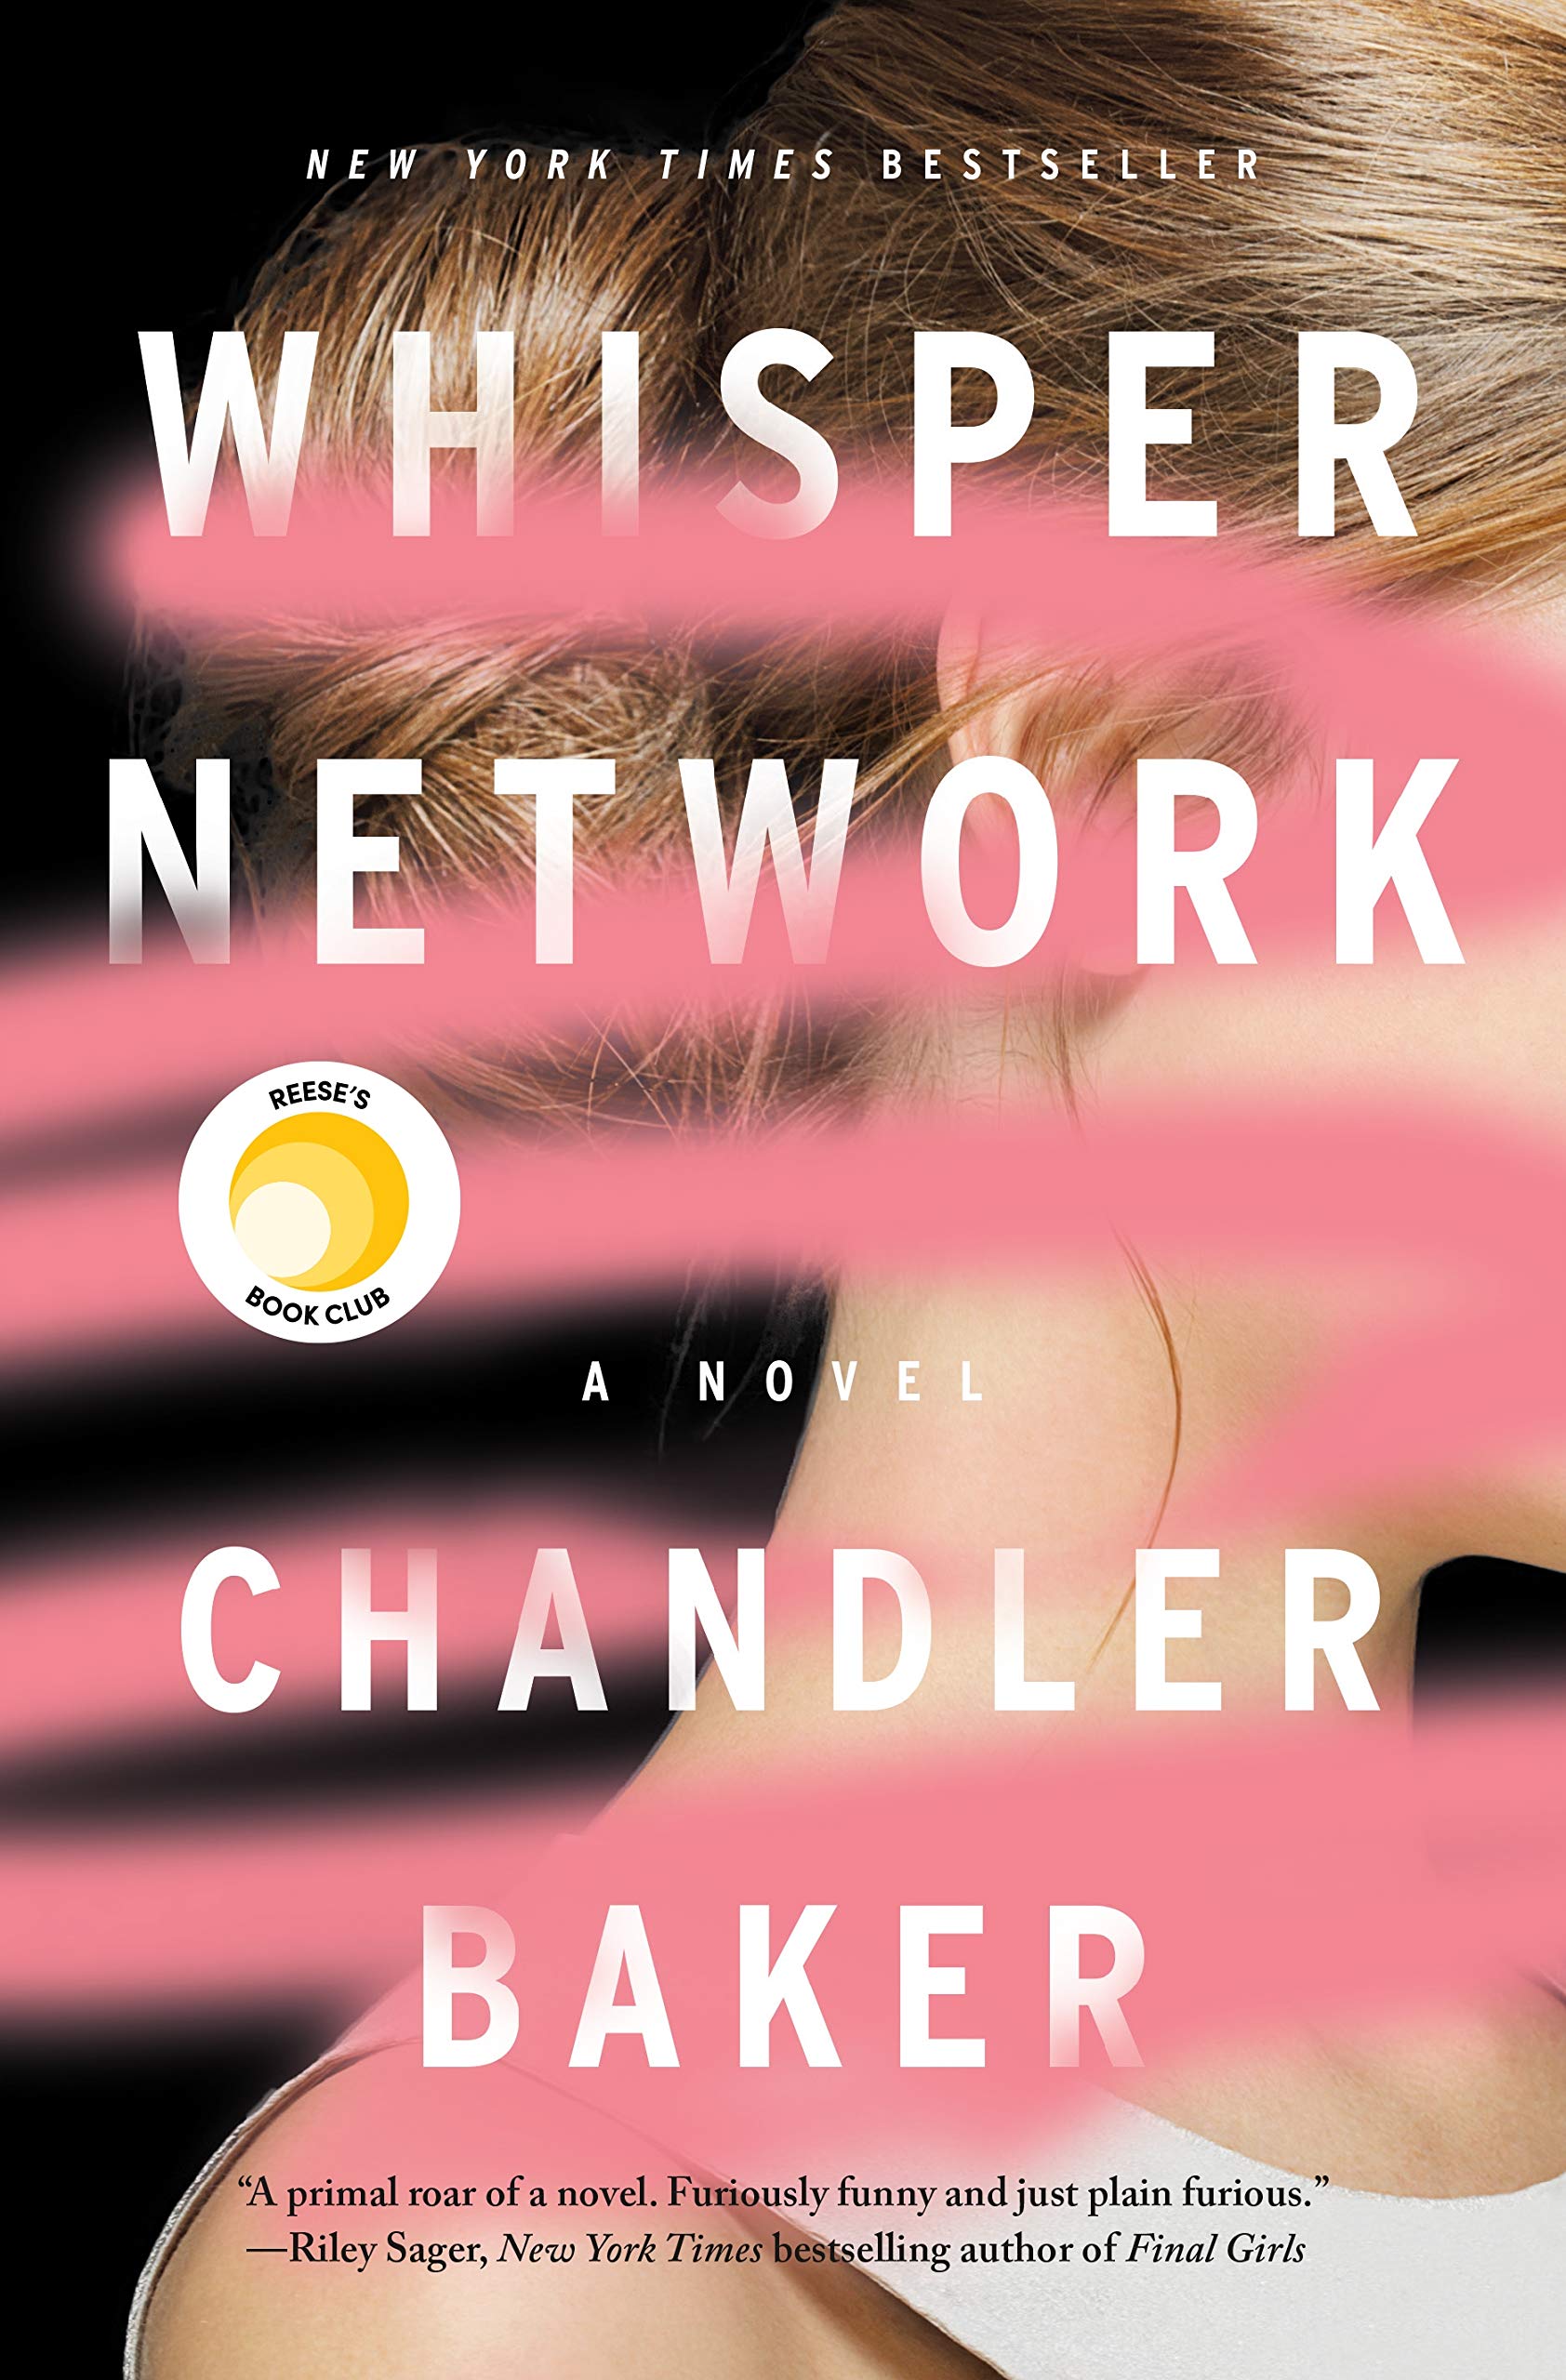 Image of the cover for the book "The Whisper Network" by Chandler Baker